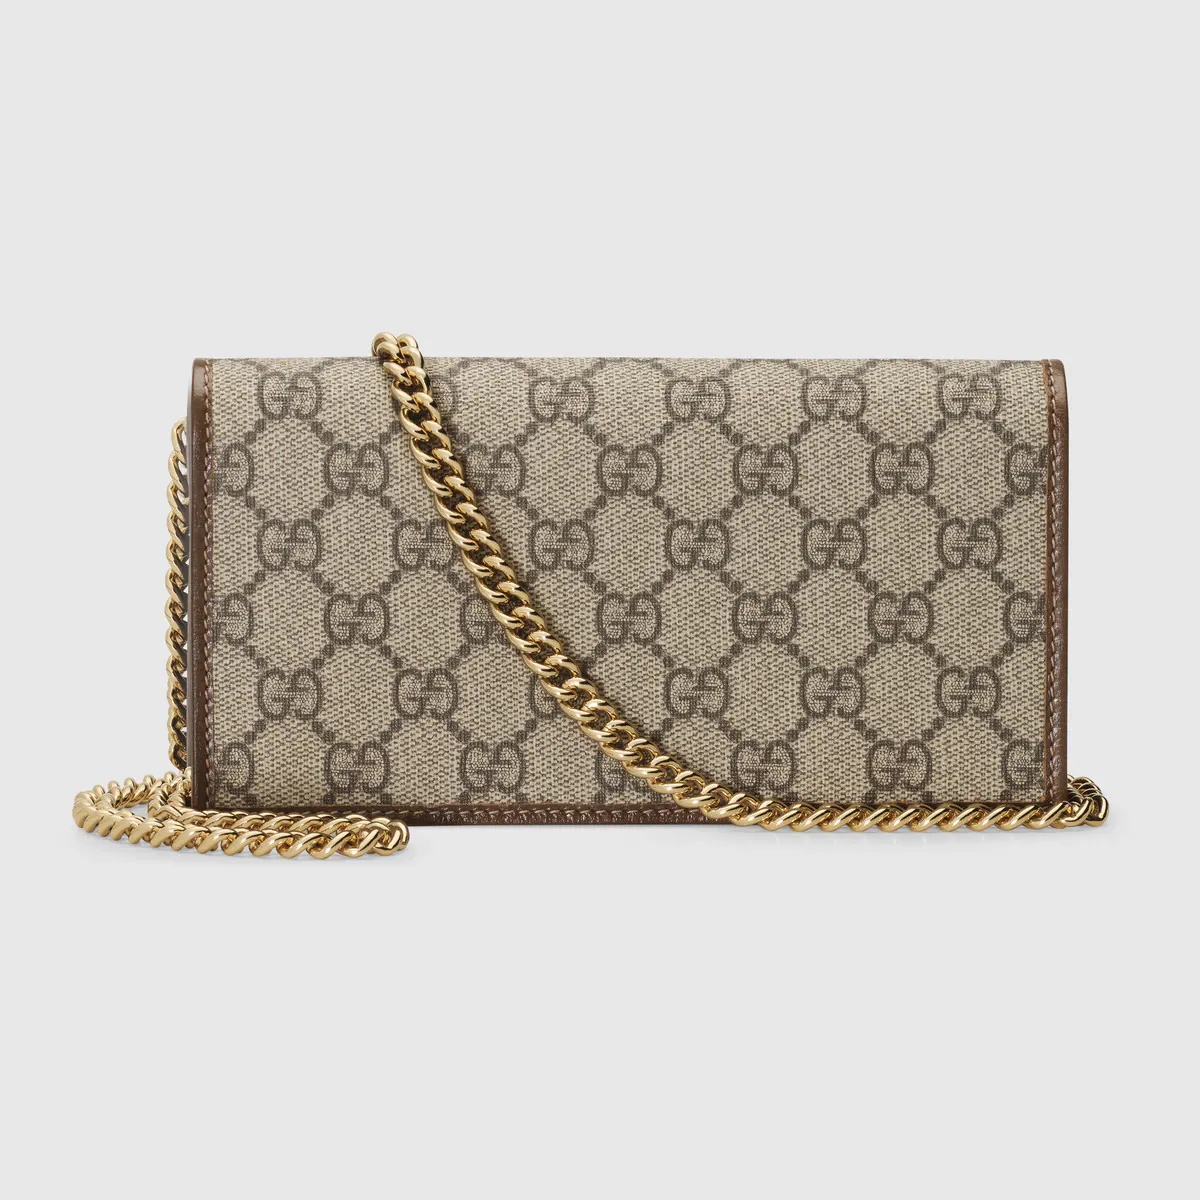 Gucci Horsebit 1955 wallet with chain - 3